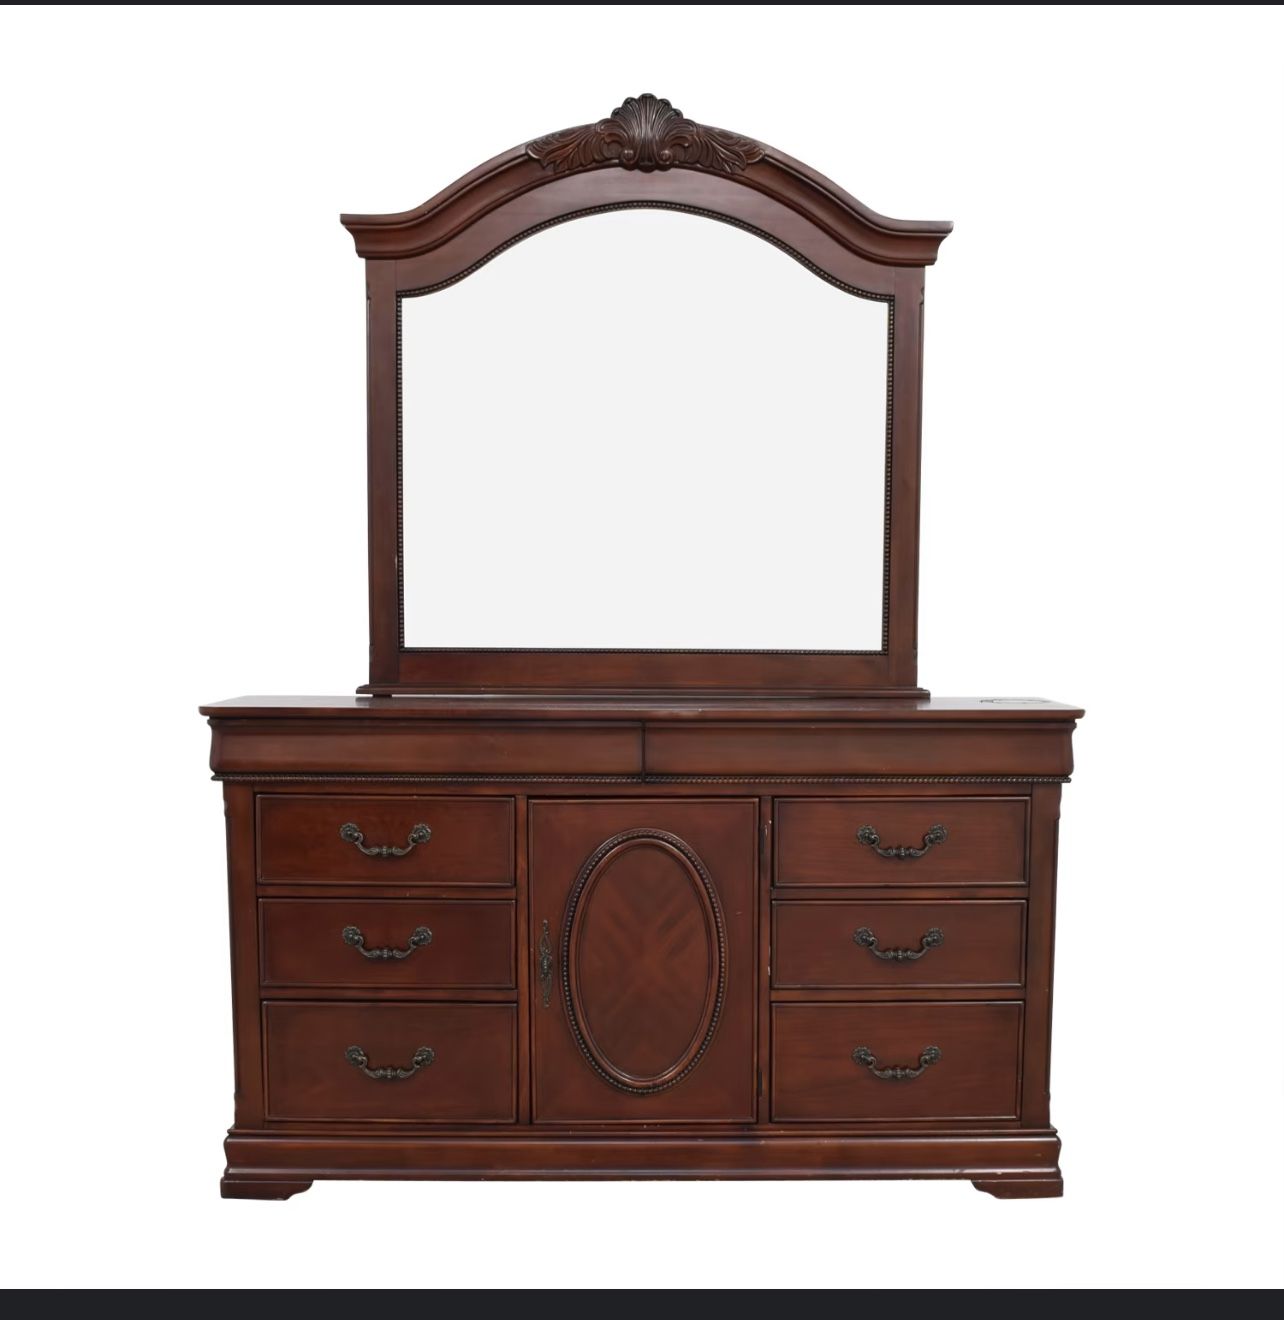 Six-Drawer Dresser With Shelves And Detachable Mirror 